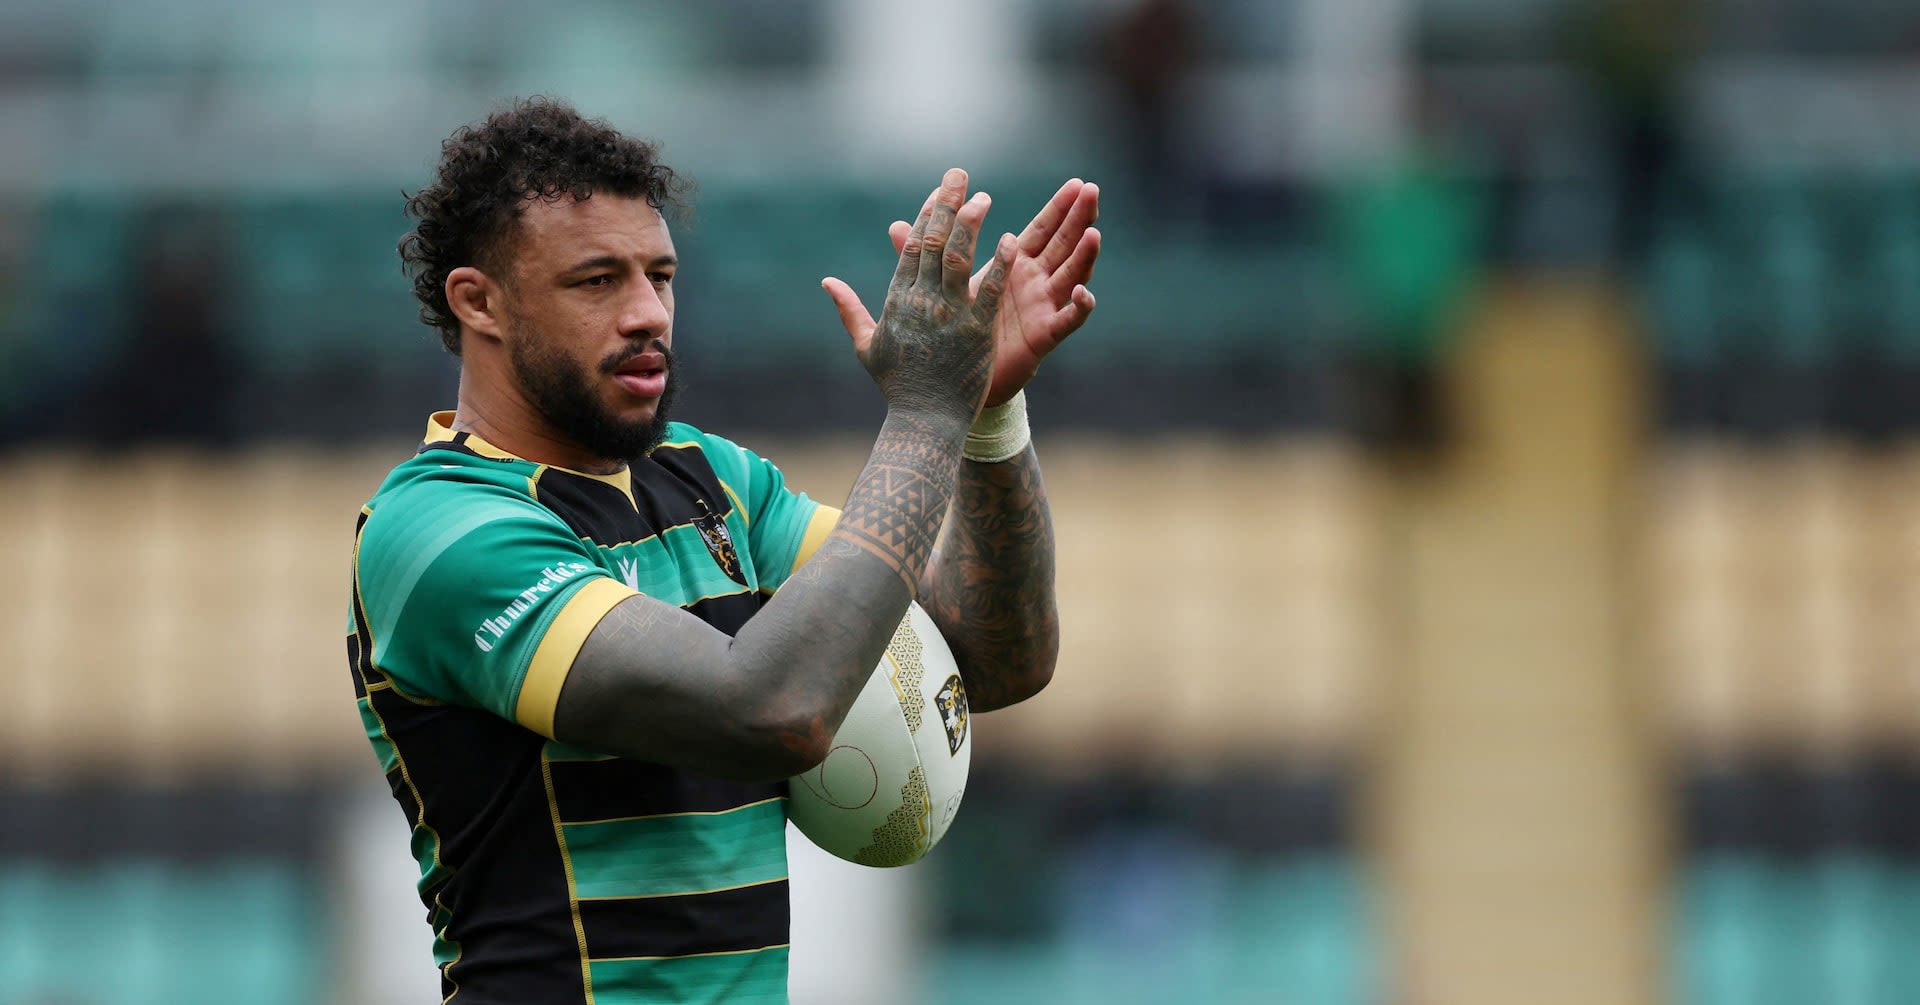 Lawes wins Rugby Writers' top award